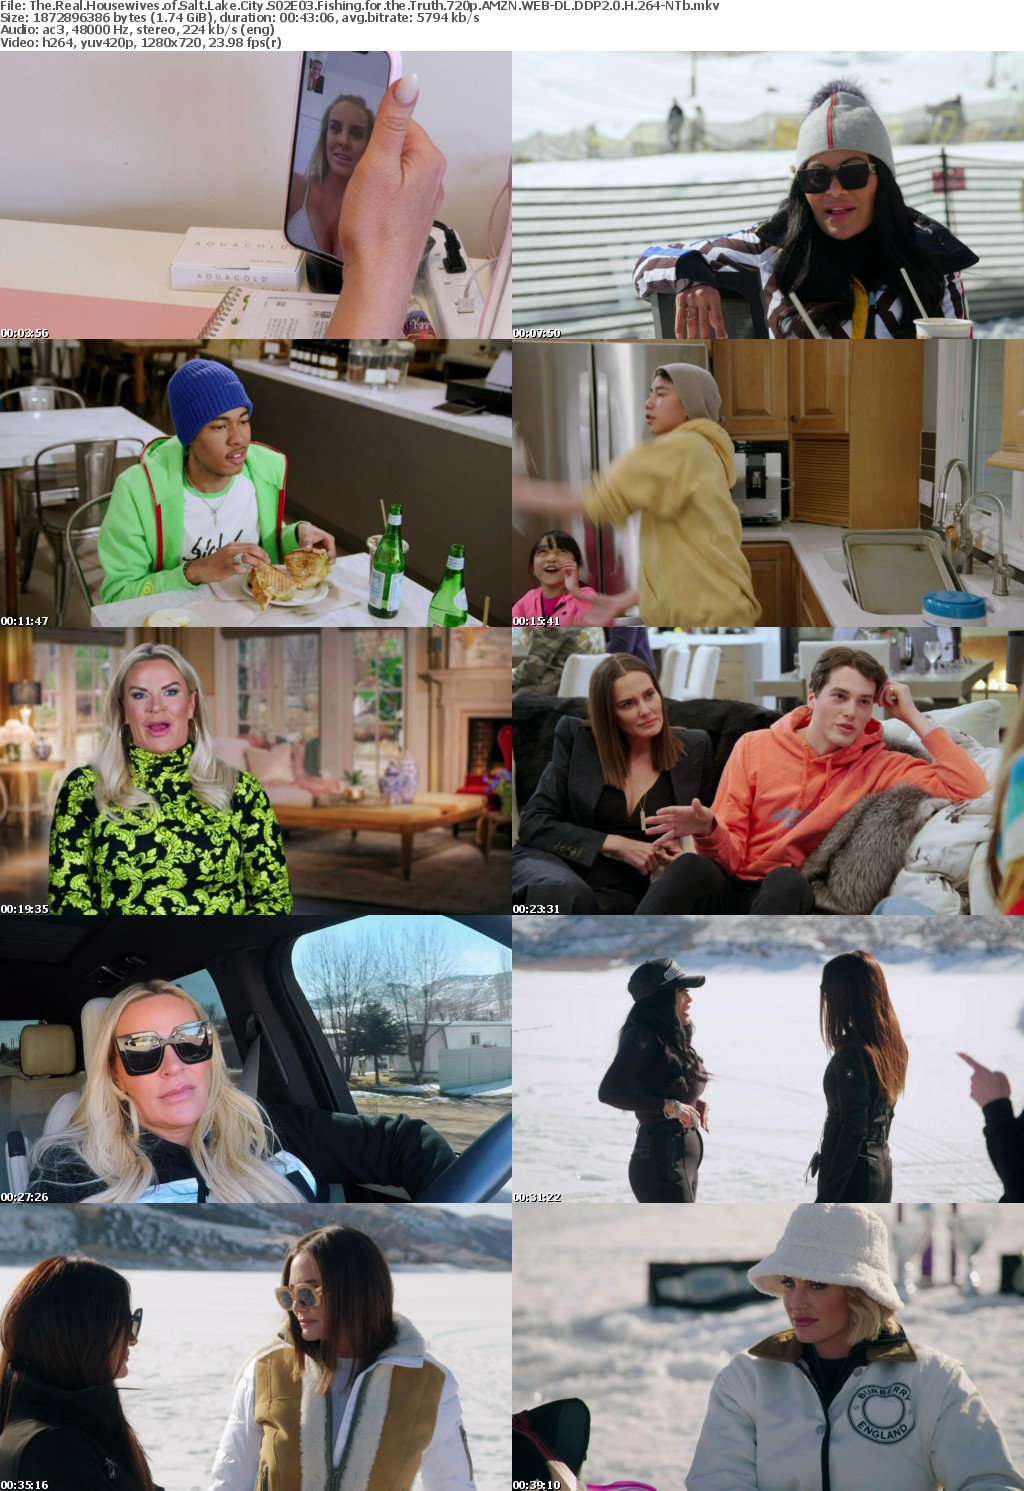 The Real Housewives of Salt Lake City S02E03 Fishing for the Truth 720p AMZN WEBRip DDP2 0 x264-NTb